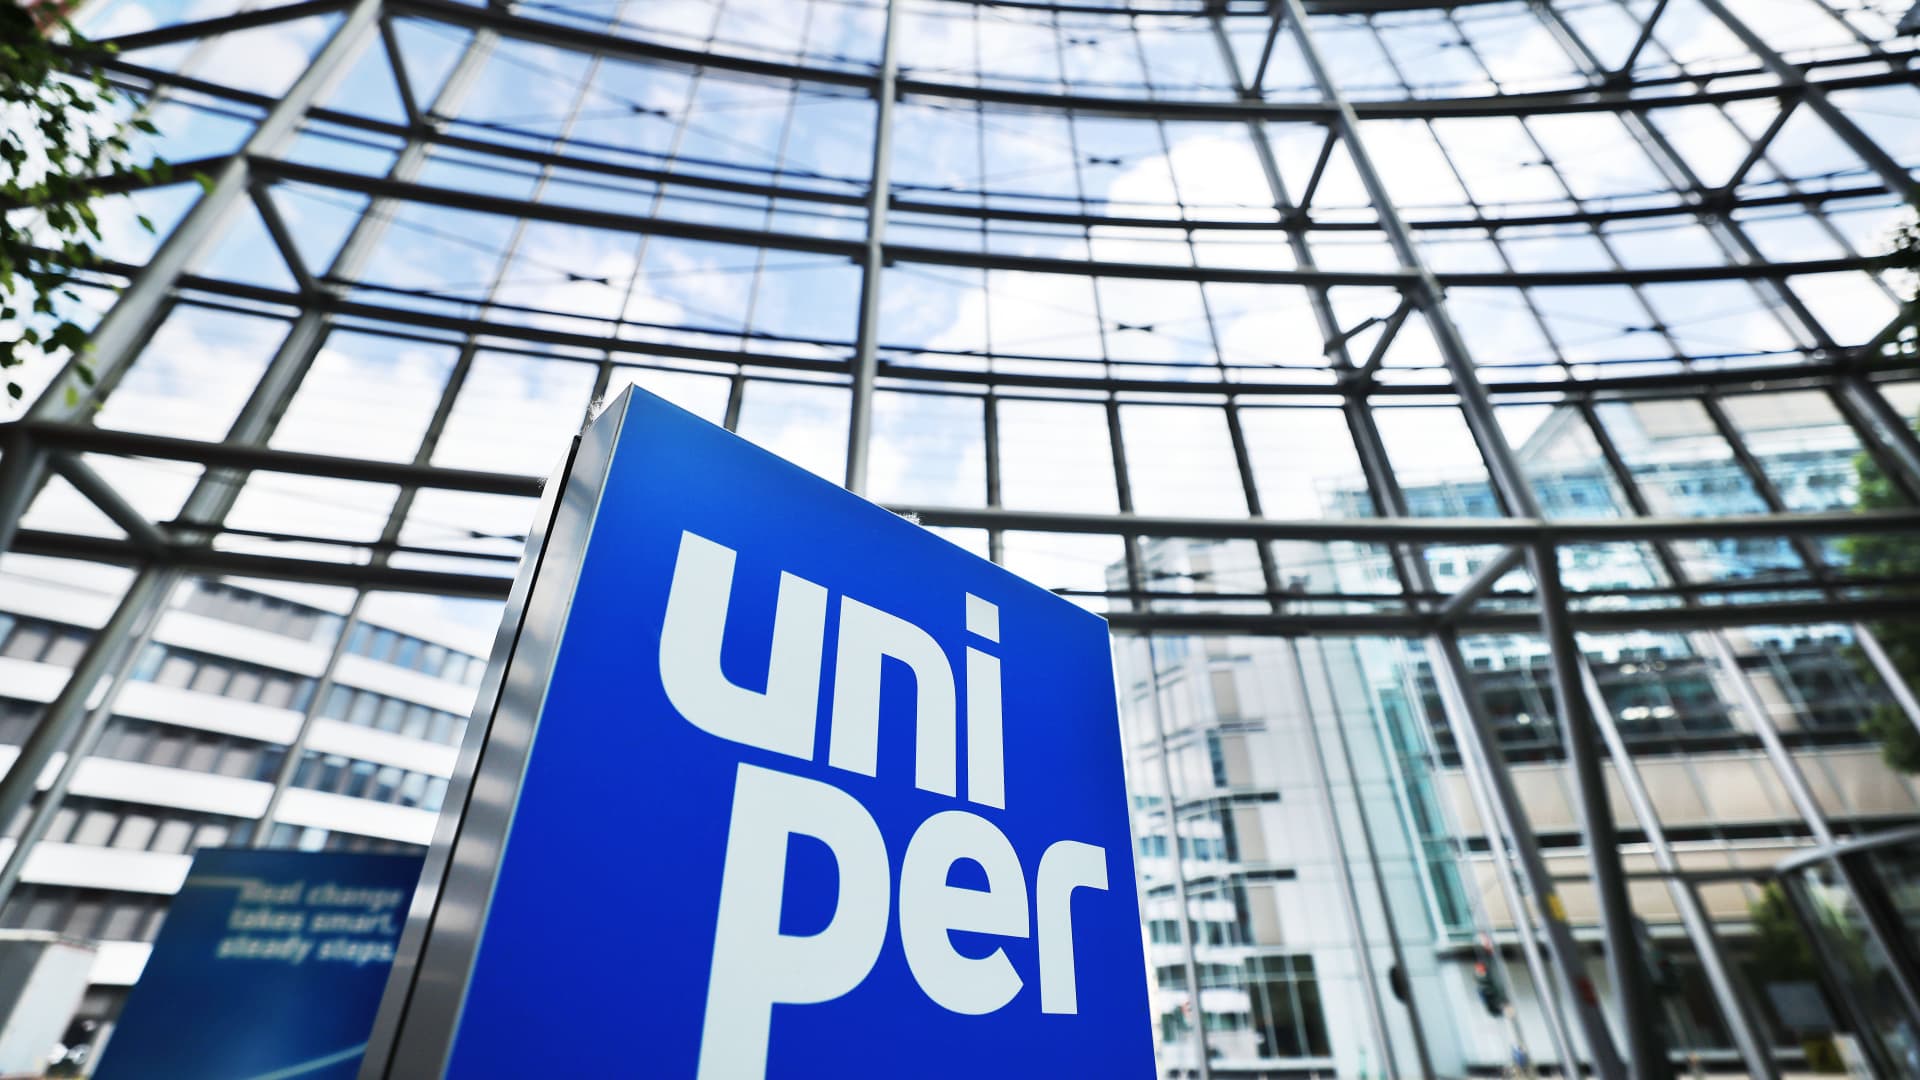 German government agrees nationalization deal for energy giant Uniper as Russia squeezes gas supplies